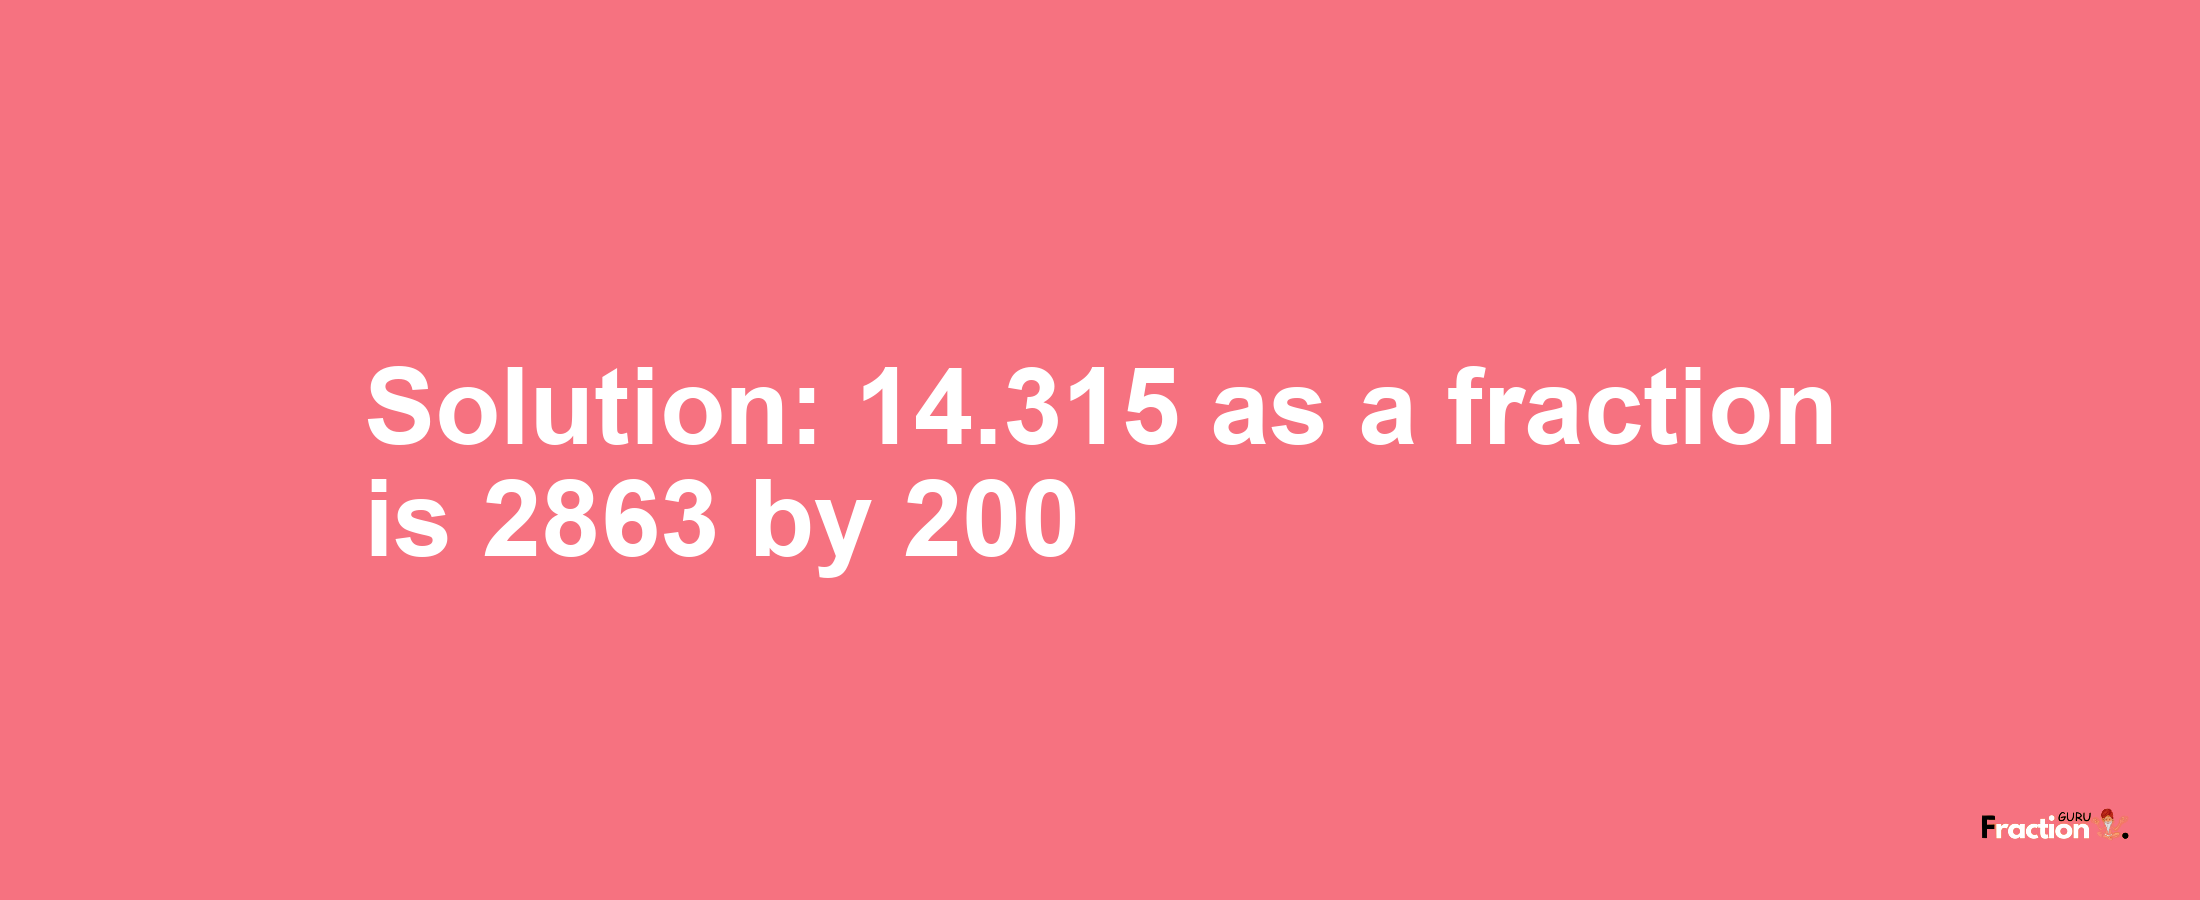 Solution:14.315 as a fraction is 2863/200